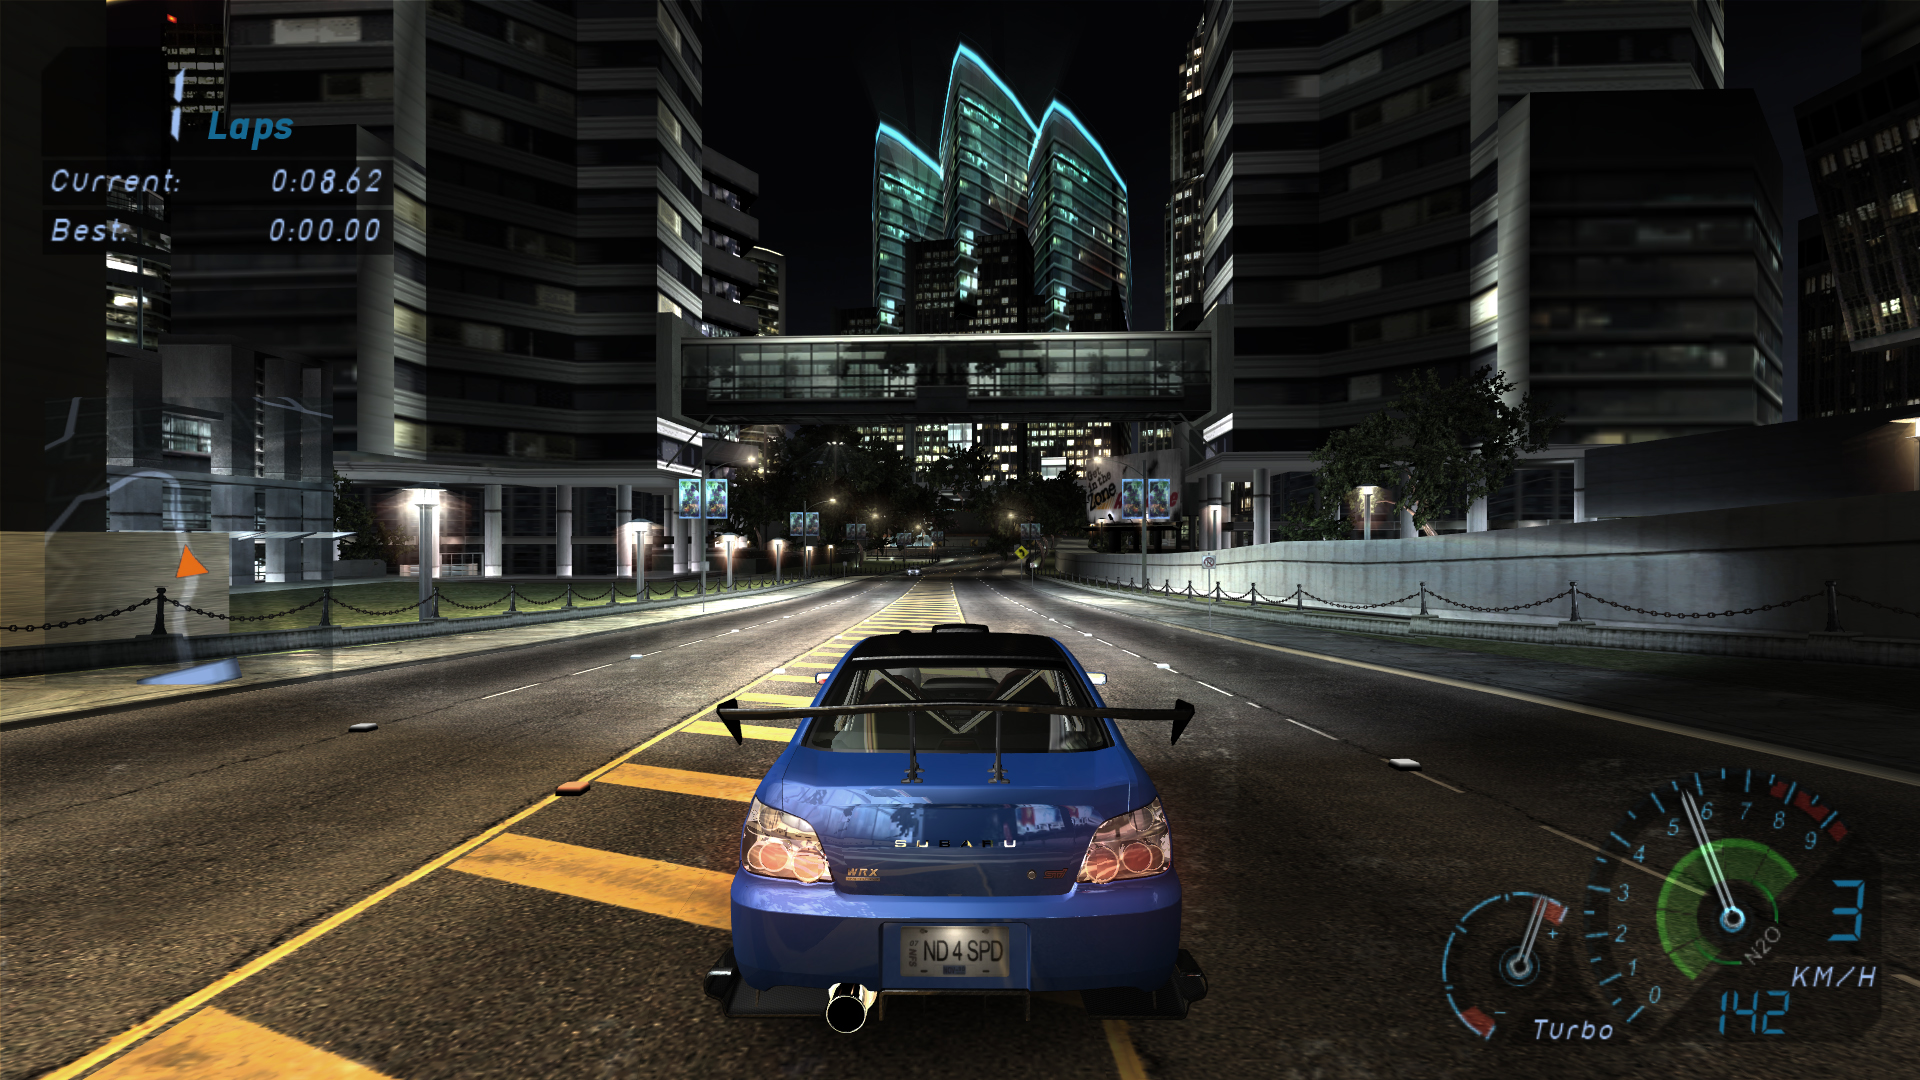 View the Mod DB mSE (m2011 v2.0) mod for Need For Speed: Underground imag.....